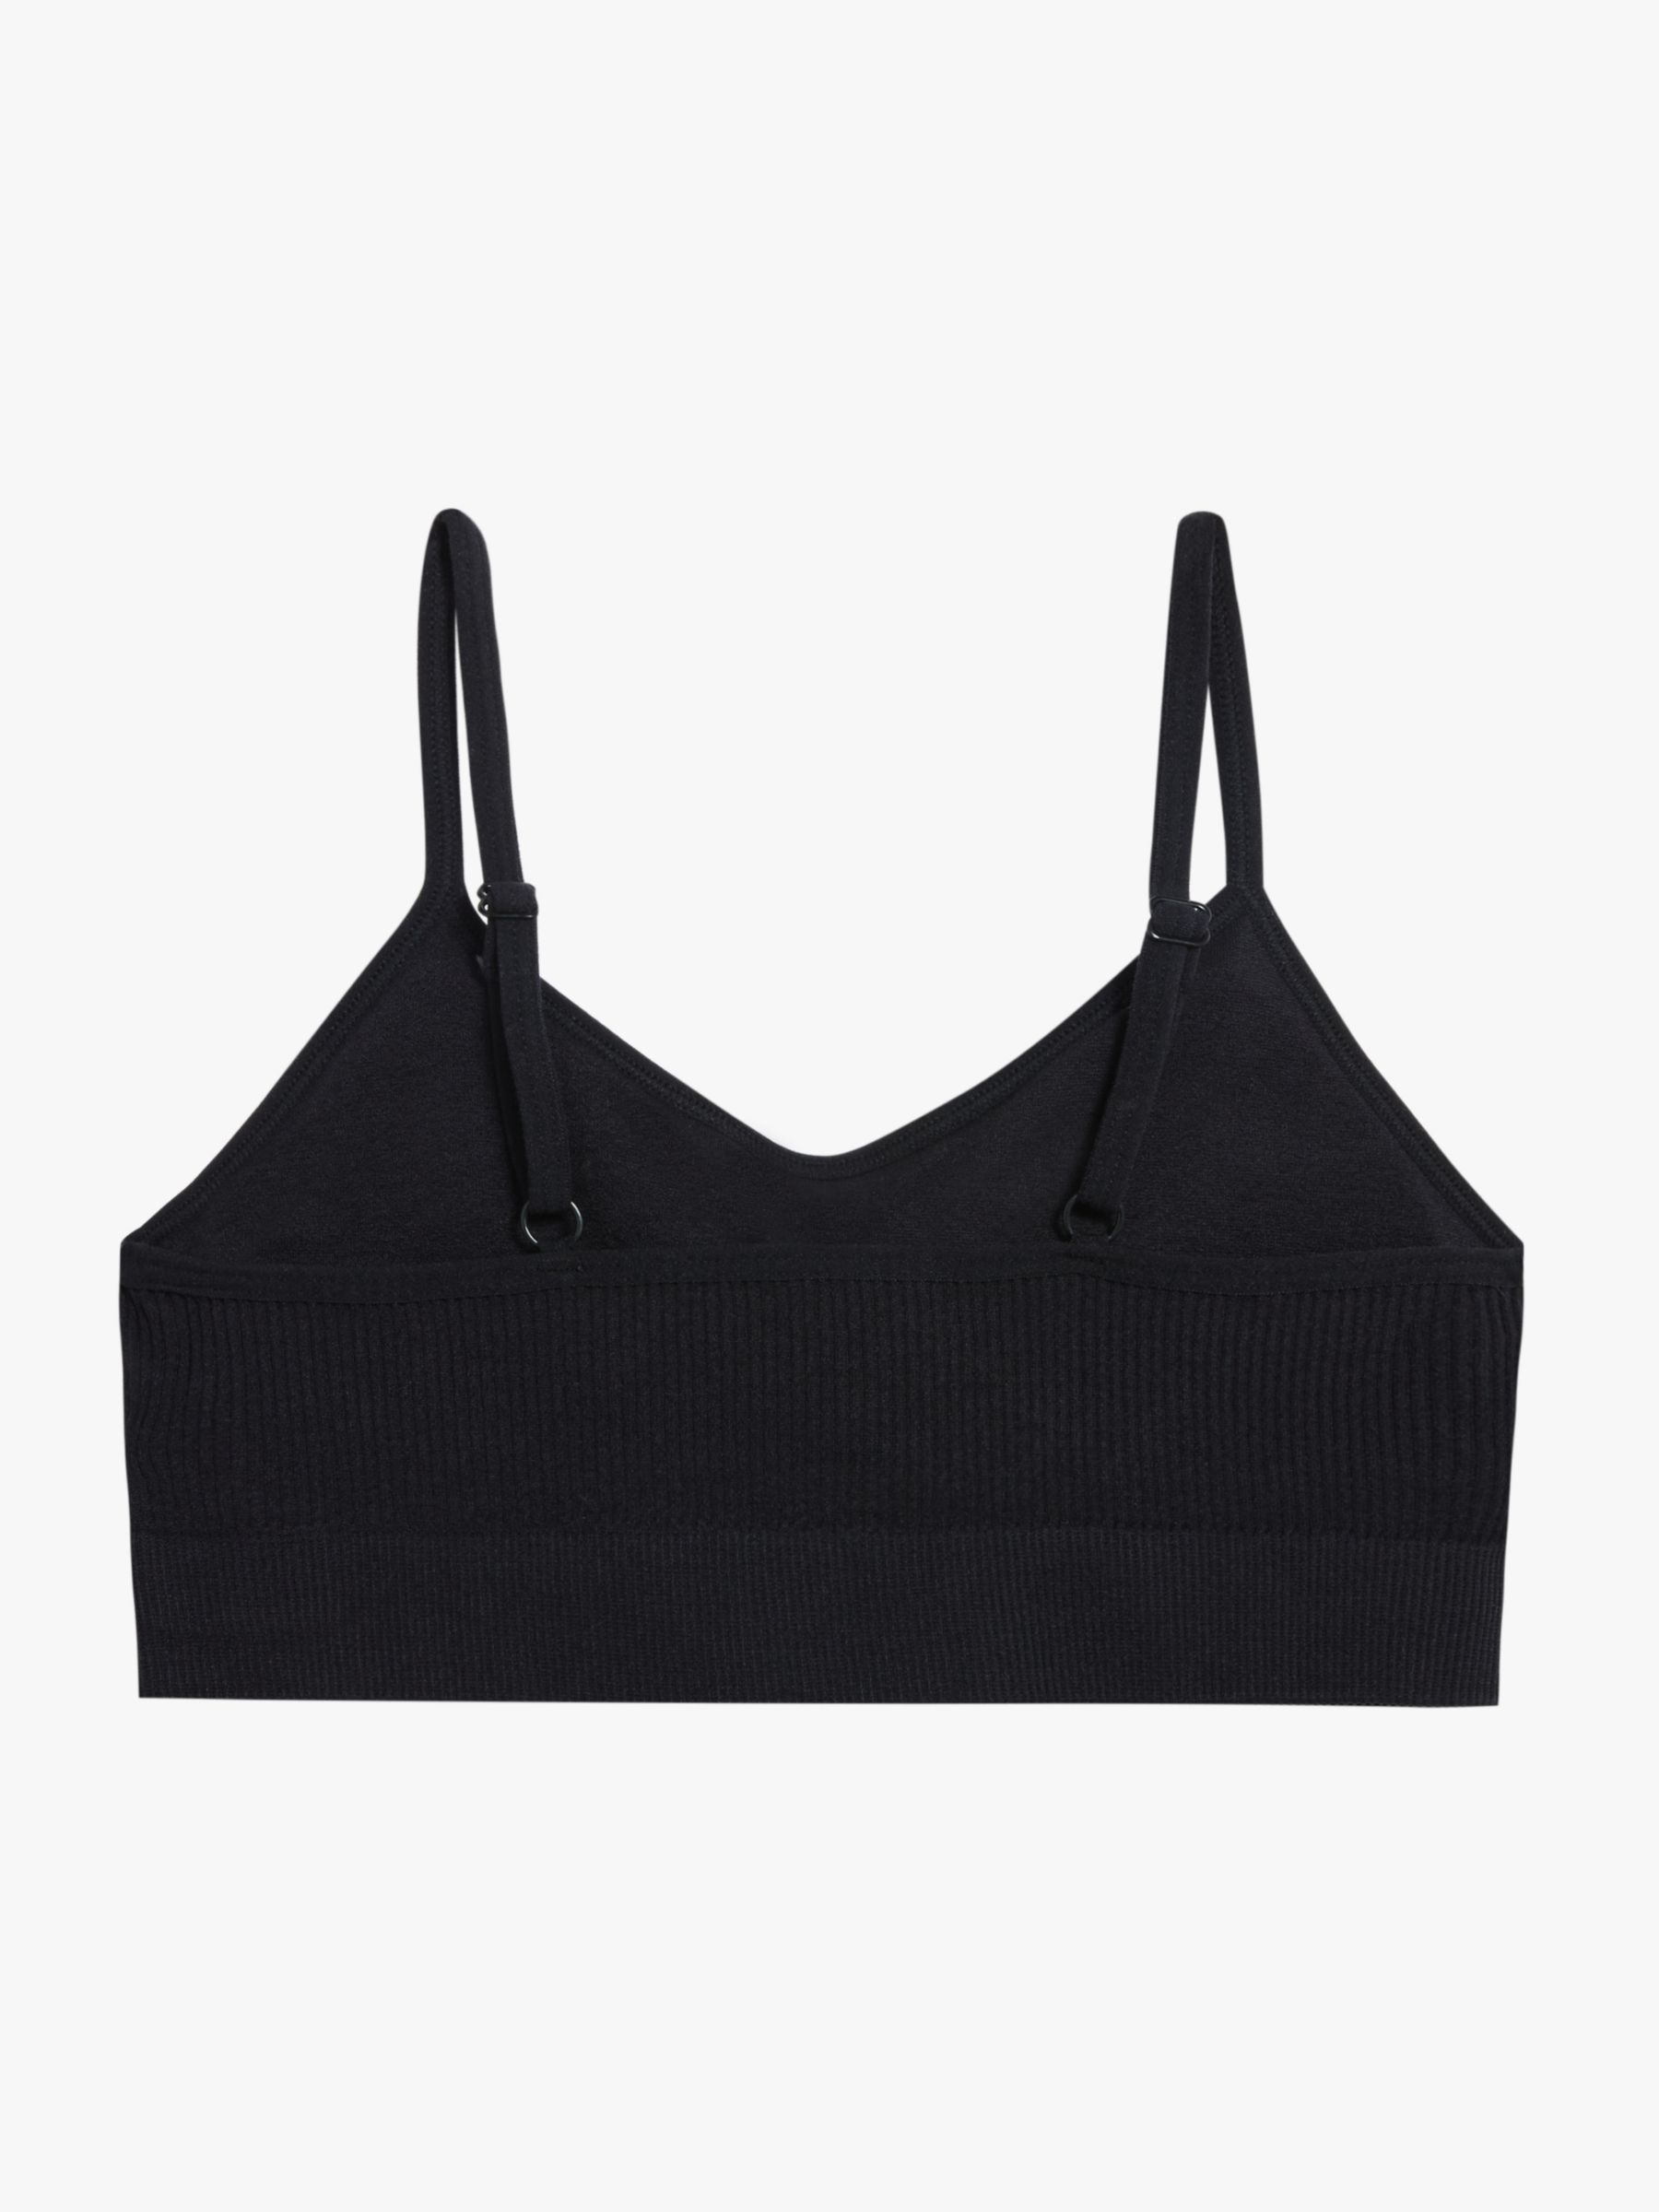 John Lewis ANYDAY Paige Non Wired Ribbed Crop Top Bra, Black, S